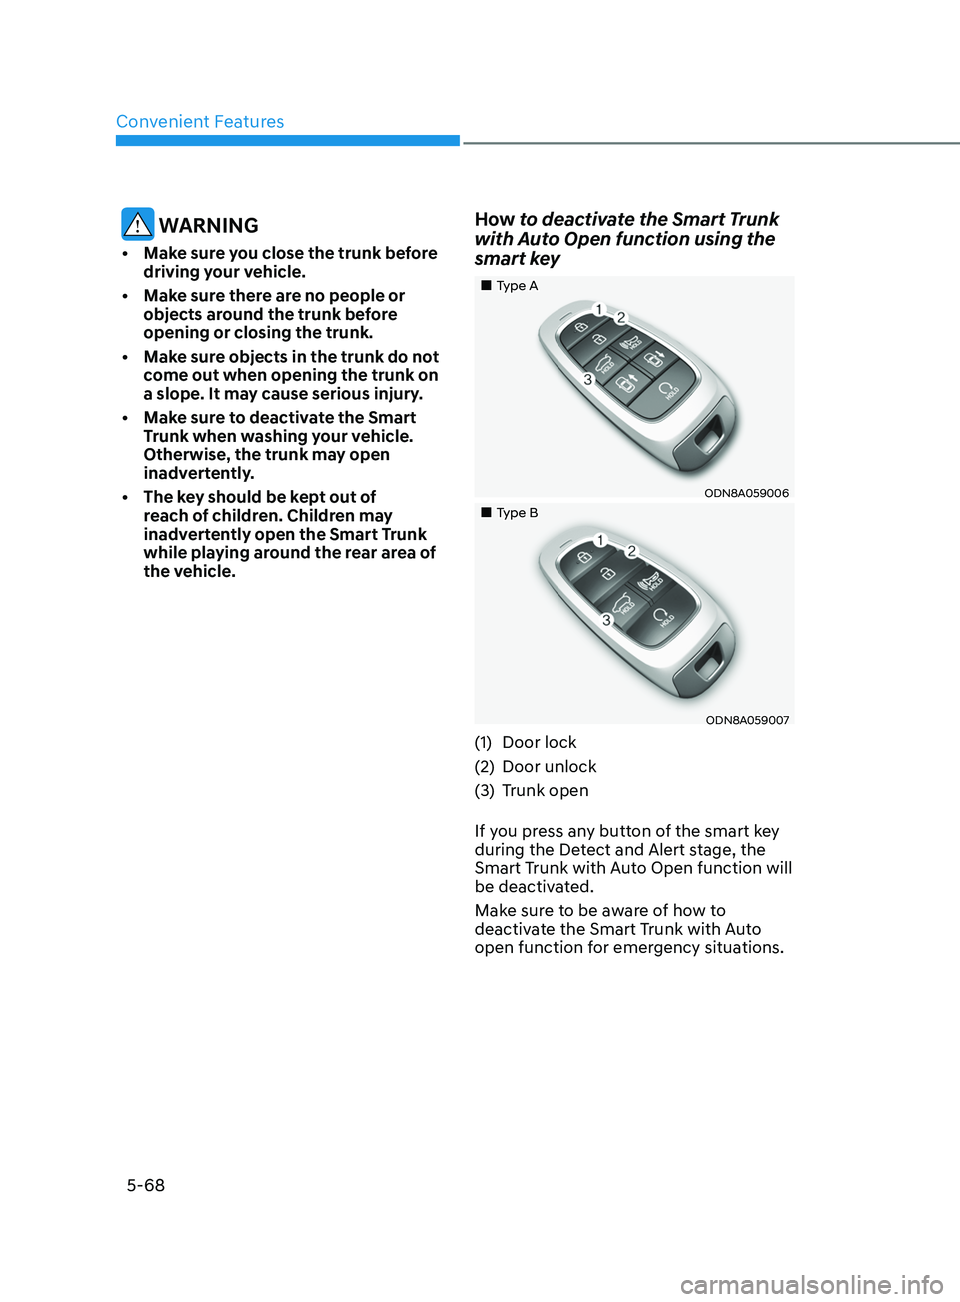 HYUNDAI SONATA 2021  Owners Manual Convenient Features
5-68
 WARNING
•Make sure you close the trunk before 
driving your vehicle.
•
Mak

e sure there are no people or 
objects around the trunk before 
opening or closing the trunk.
